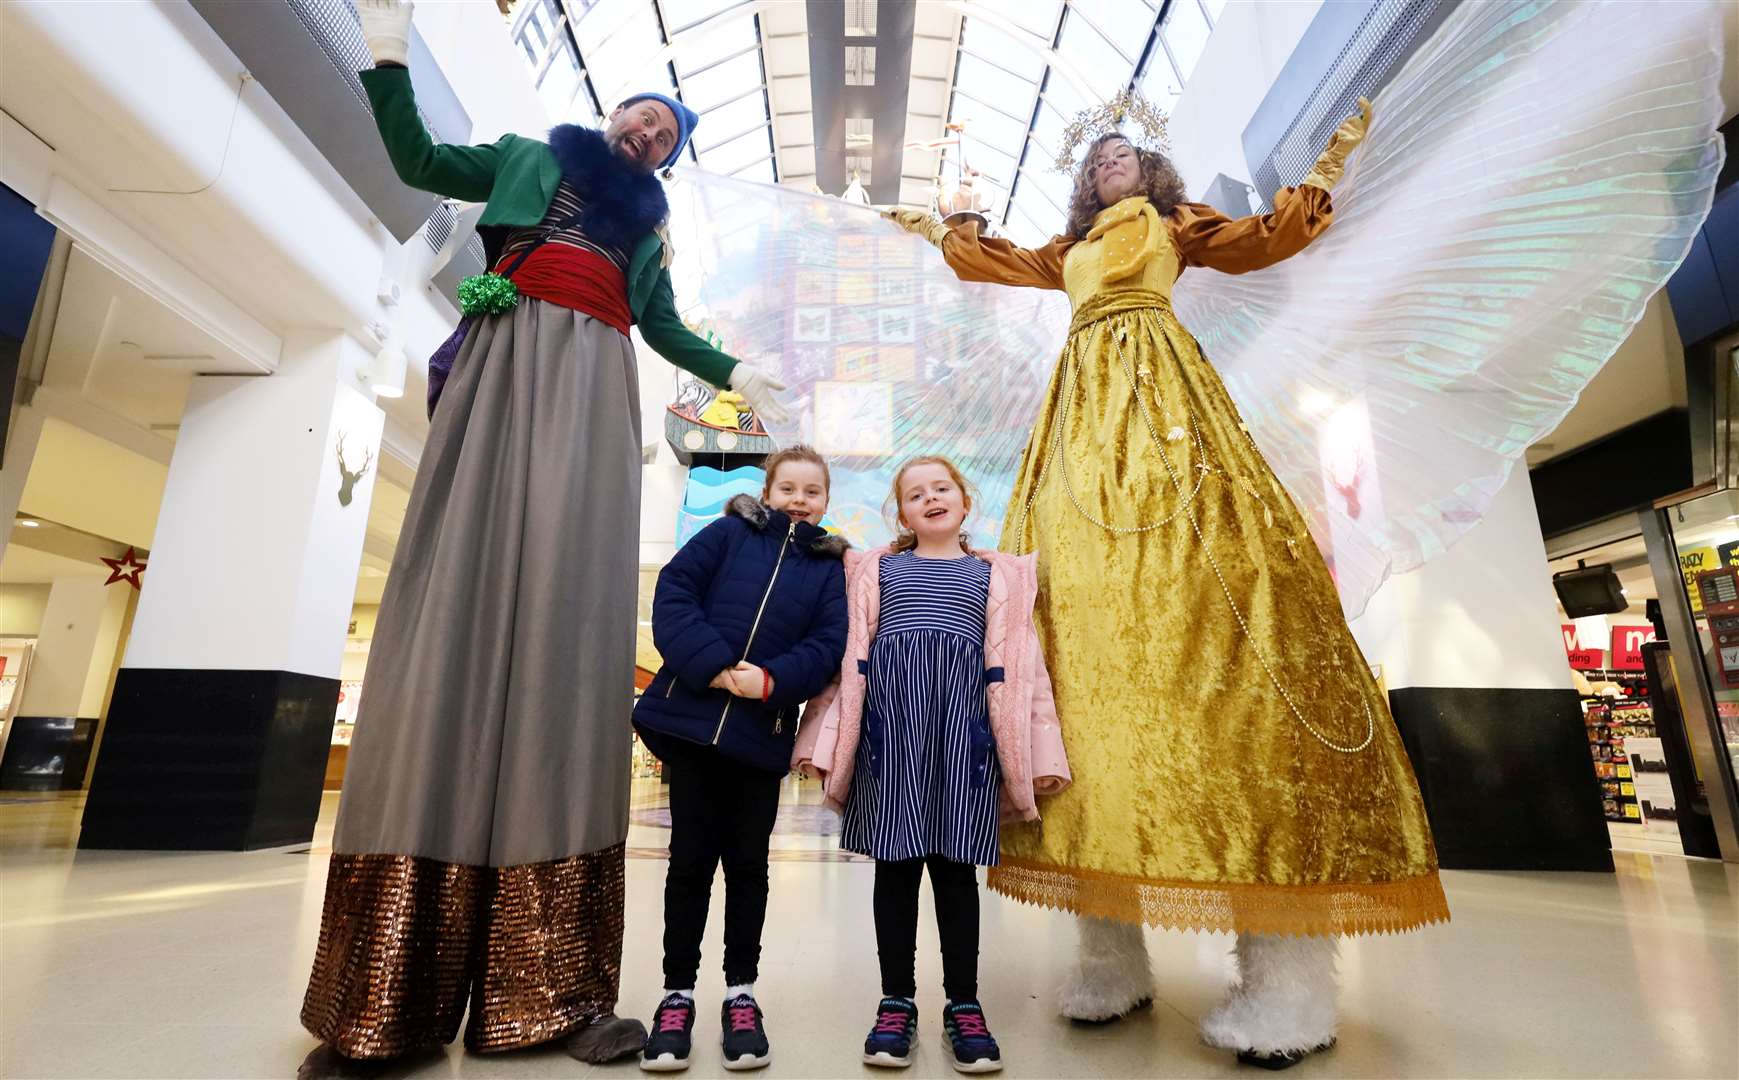 Grace and Aria Ross with the Tall Elf and Christmas Tree Fairy from Fly Agaric Performing Arts. Picture: James Mackenzie